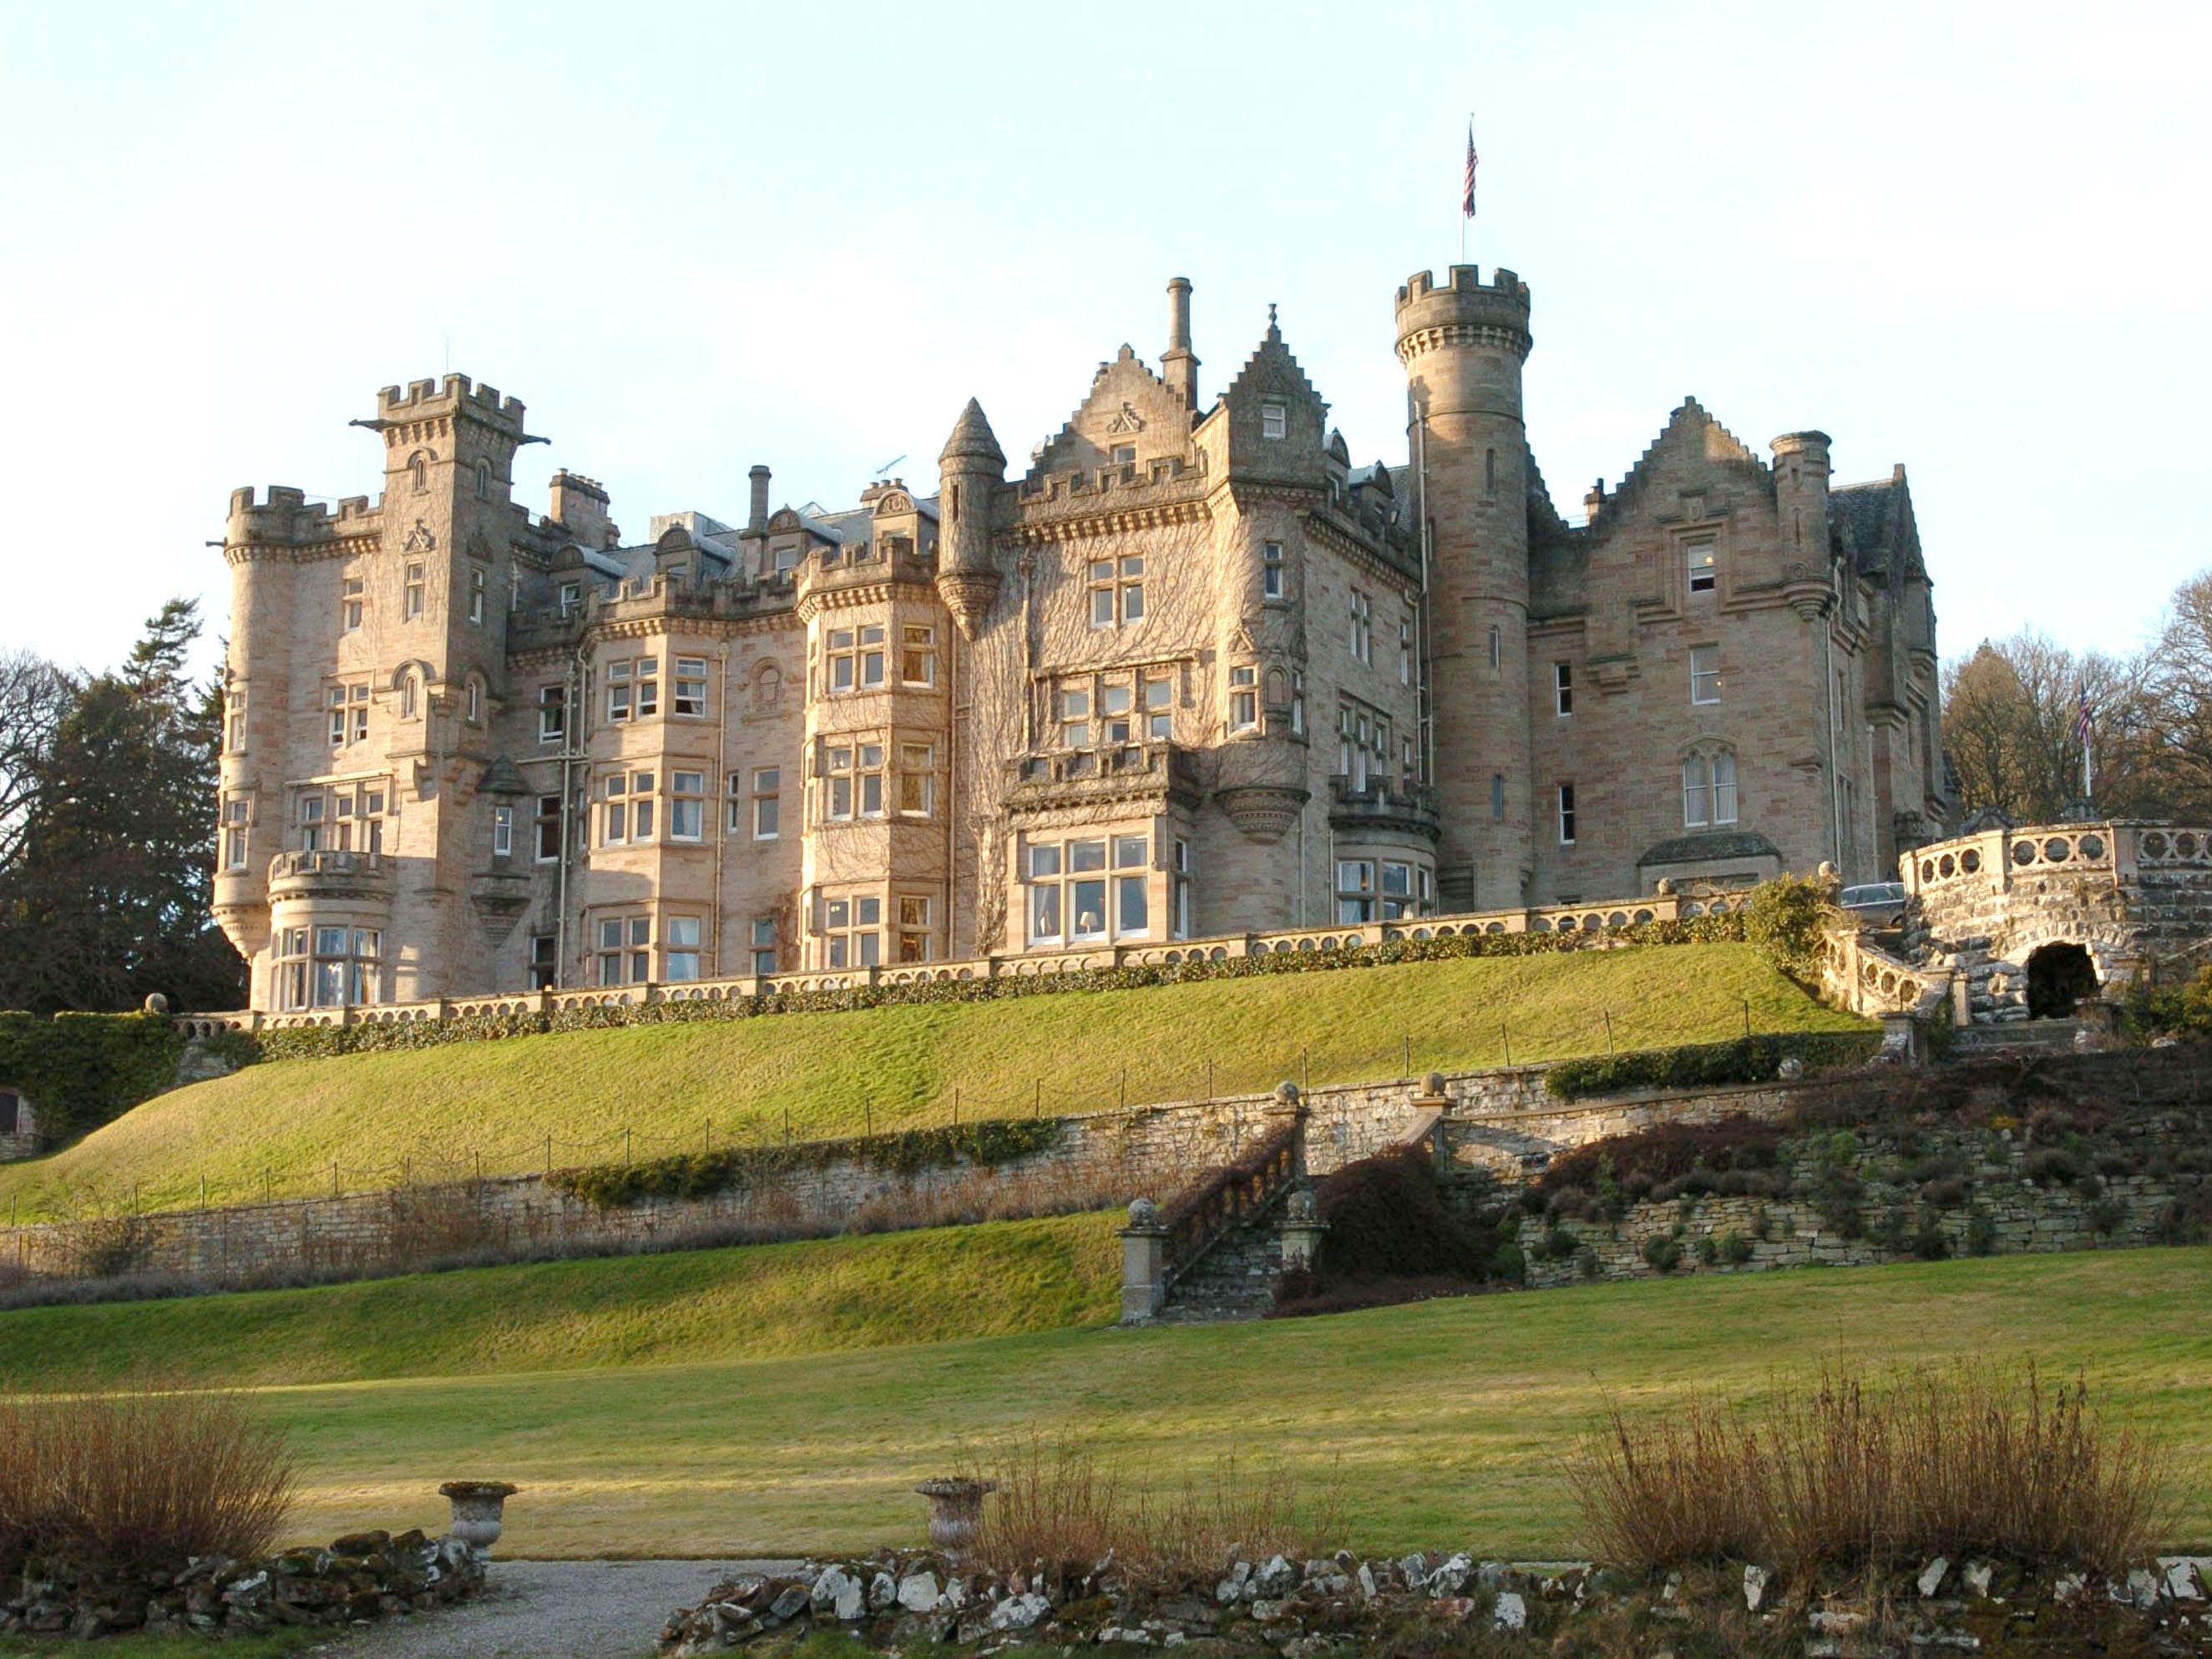 <p>The Gr8 Experience, a luxury travel firm specializing in exclusive experiences, has a personal relationship with the Carnegie Club at Skibo, according to Gr8's CEO Barnabas Carrega.</p><p>Carrega told Business Insider that visiting Skibo is "one of the most incredible experiences" he's ever seen from a country club in terms of level of service, privacy, and exclusivity, describing it as "an immense club."</p><p>Per the <a href="https://www.carnegieclub.co.uk/">Carnegie Club's website</a>, the golf course Carnegie Links, "is ideal for both beginners finding their feet on the greens and more accomplished players looking to perfect their swing. Lessons can be booked with our resident PGA professionals."</p>